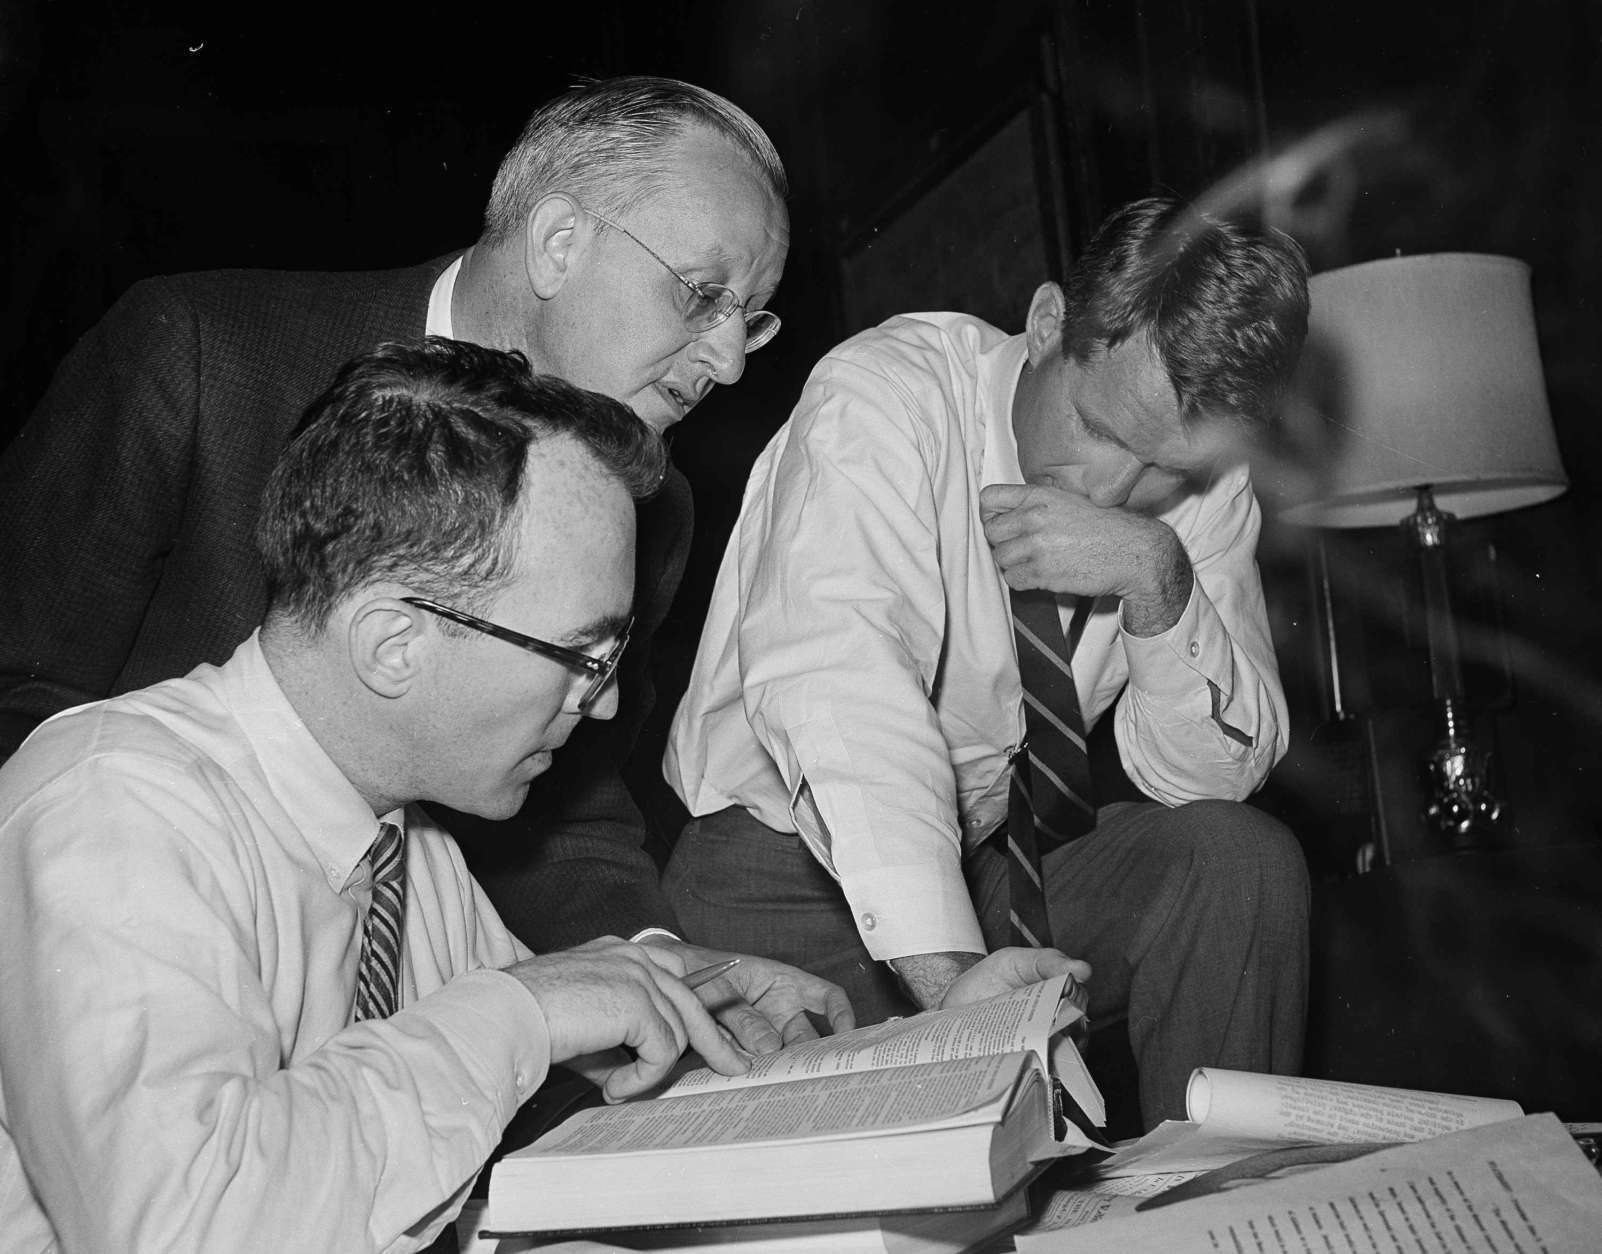 Attorney General Robert F. Kennedy, right, watches as Assistant Deputy Attorney General William Geoghegan, seated, looks up a point of law on the use of U.S. Marshal assisted by Leon William, of Kennedys office of legal counsel at the Justice Department, May 21, 1961, Washington, D.C. The attorney general ordered a task force of U.S. Marshal to Montgomery, Ala., where the arrival of a busload of white and African American youths touched off racial violence on May 20. (AP Photo/Byron Rollins)